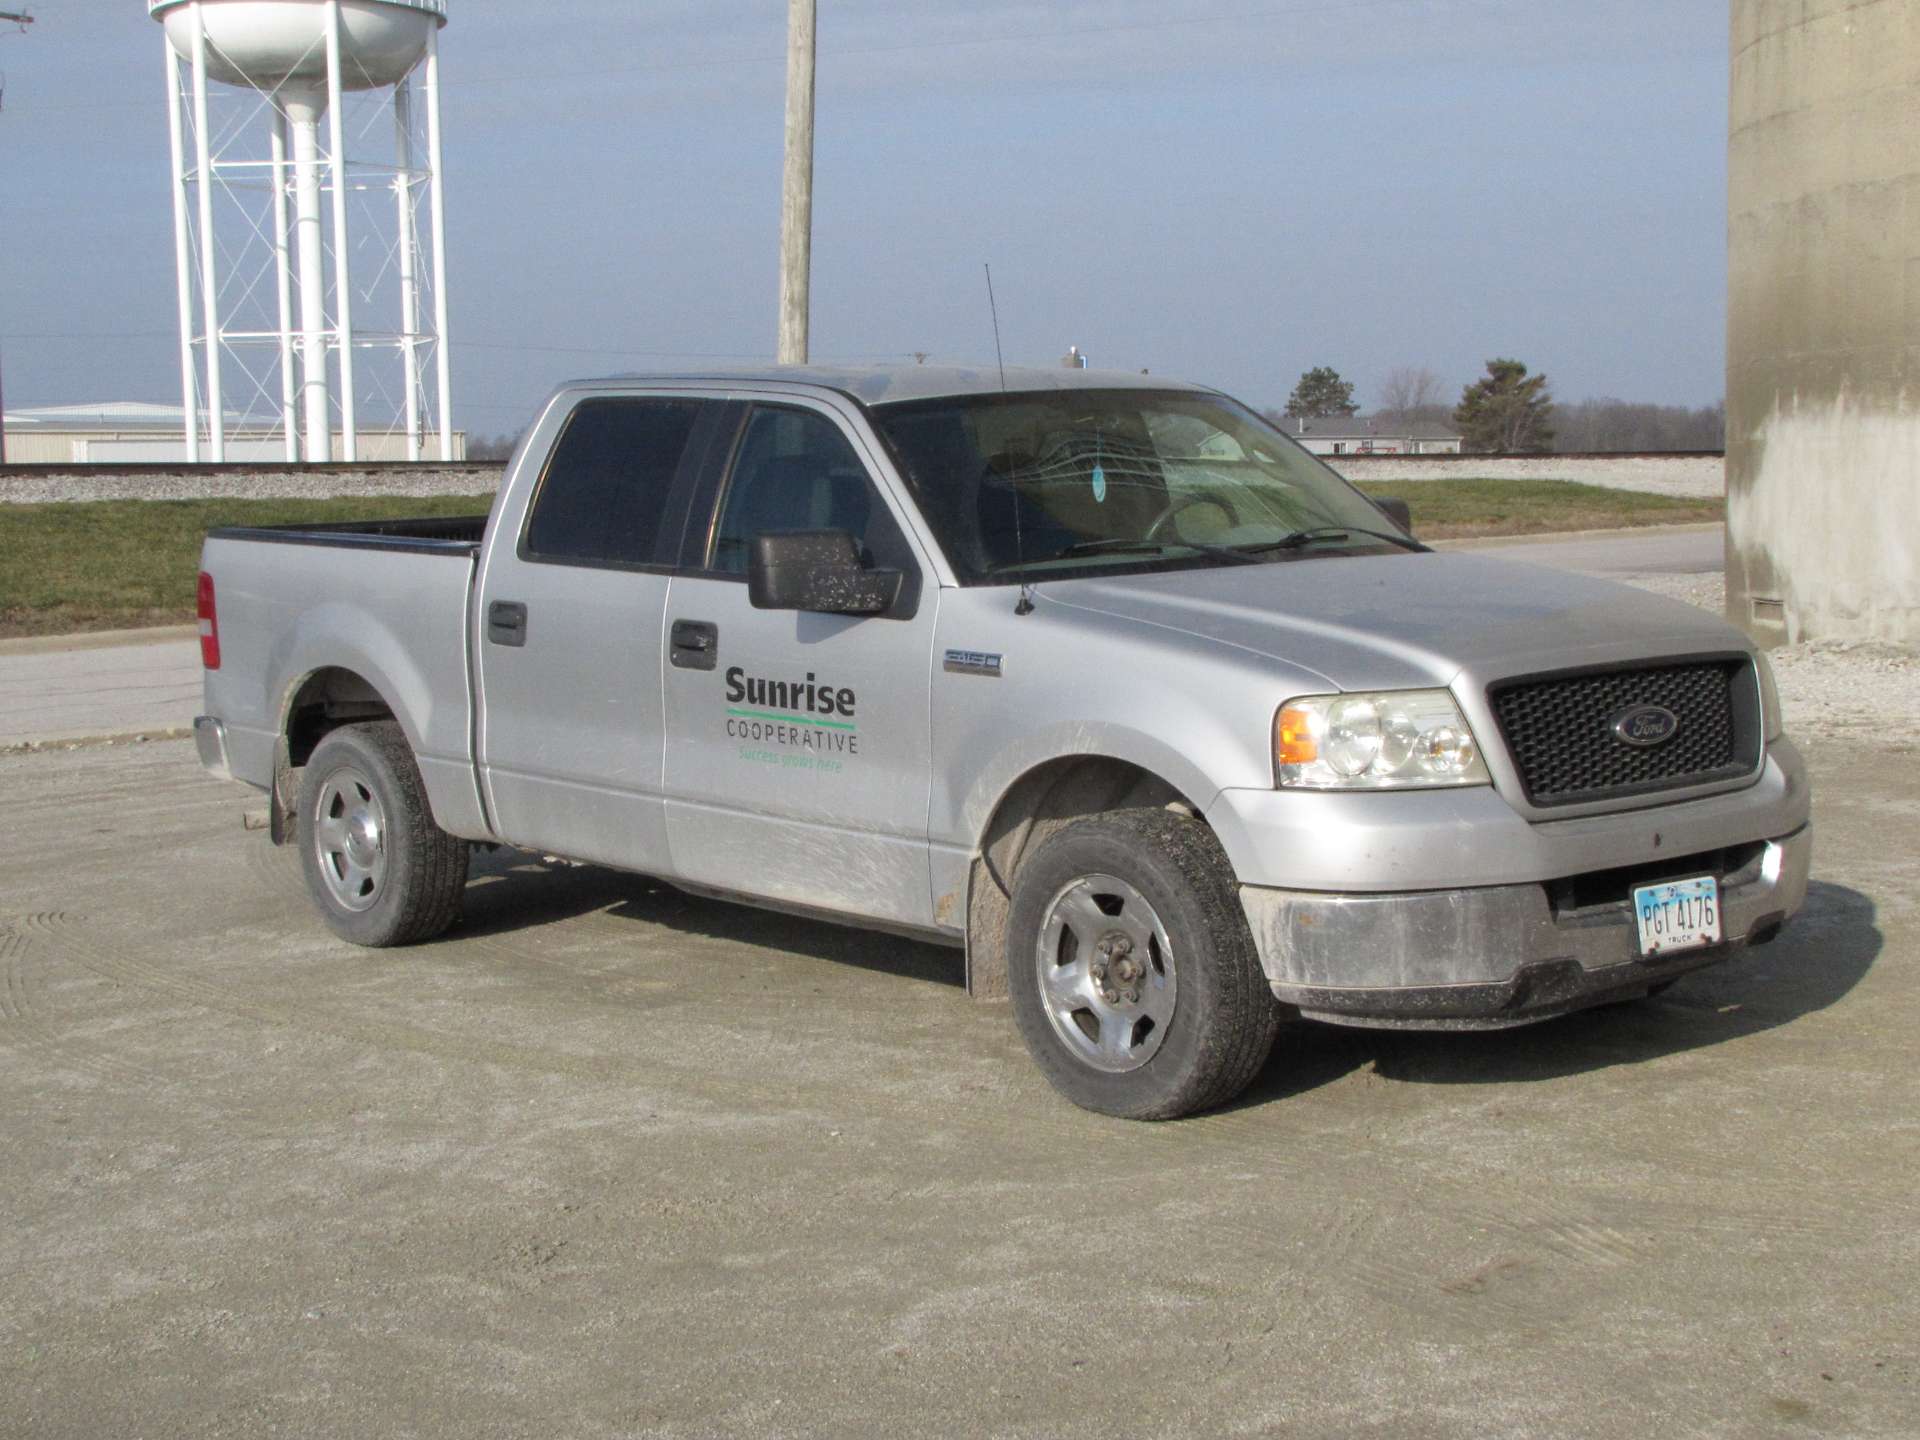 2005 Ford F-150 XLT pickup truck - Image 15 of 89